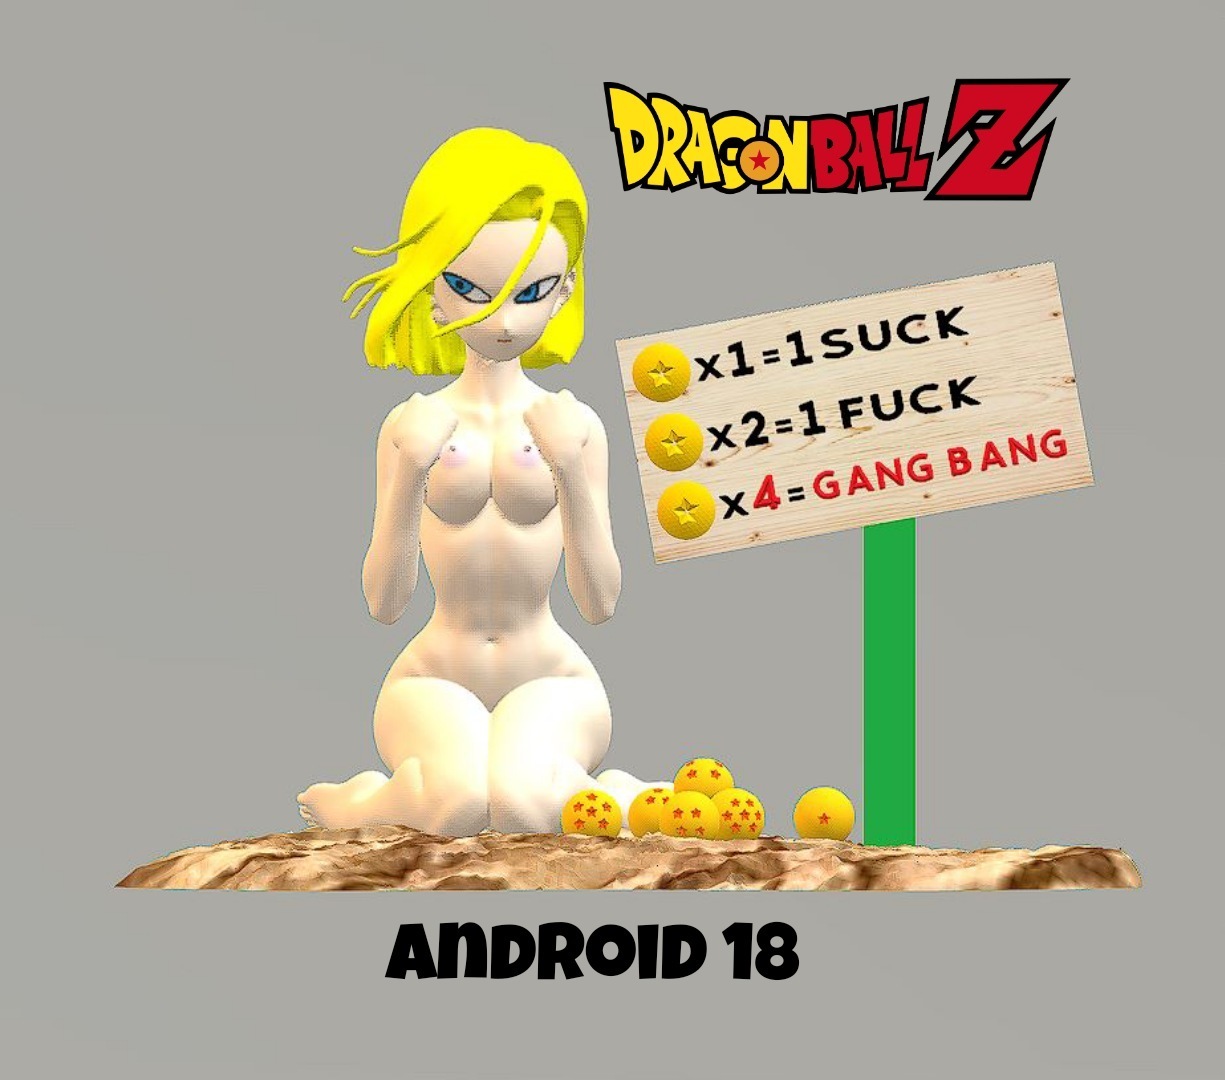 becky vee recommends dbz android 18 nude pic